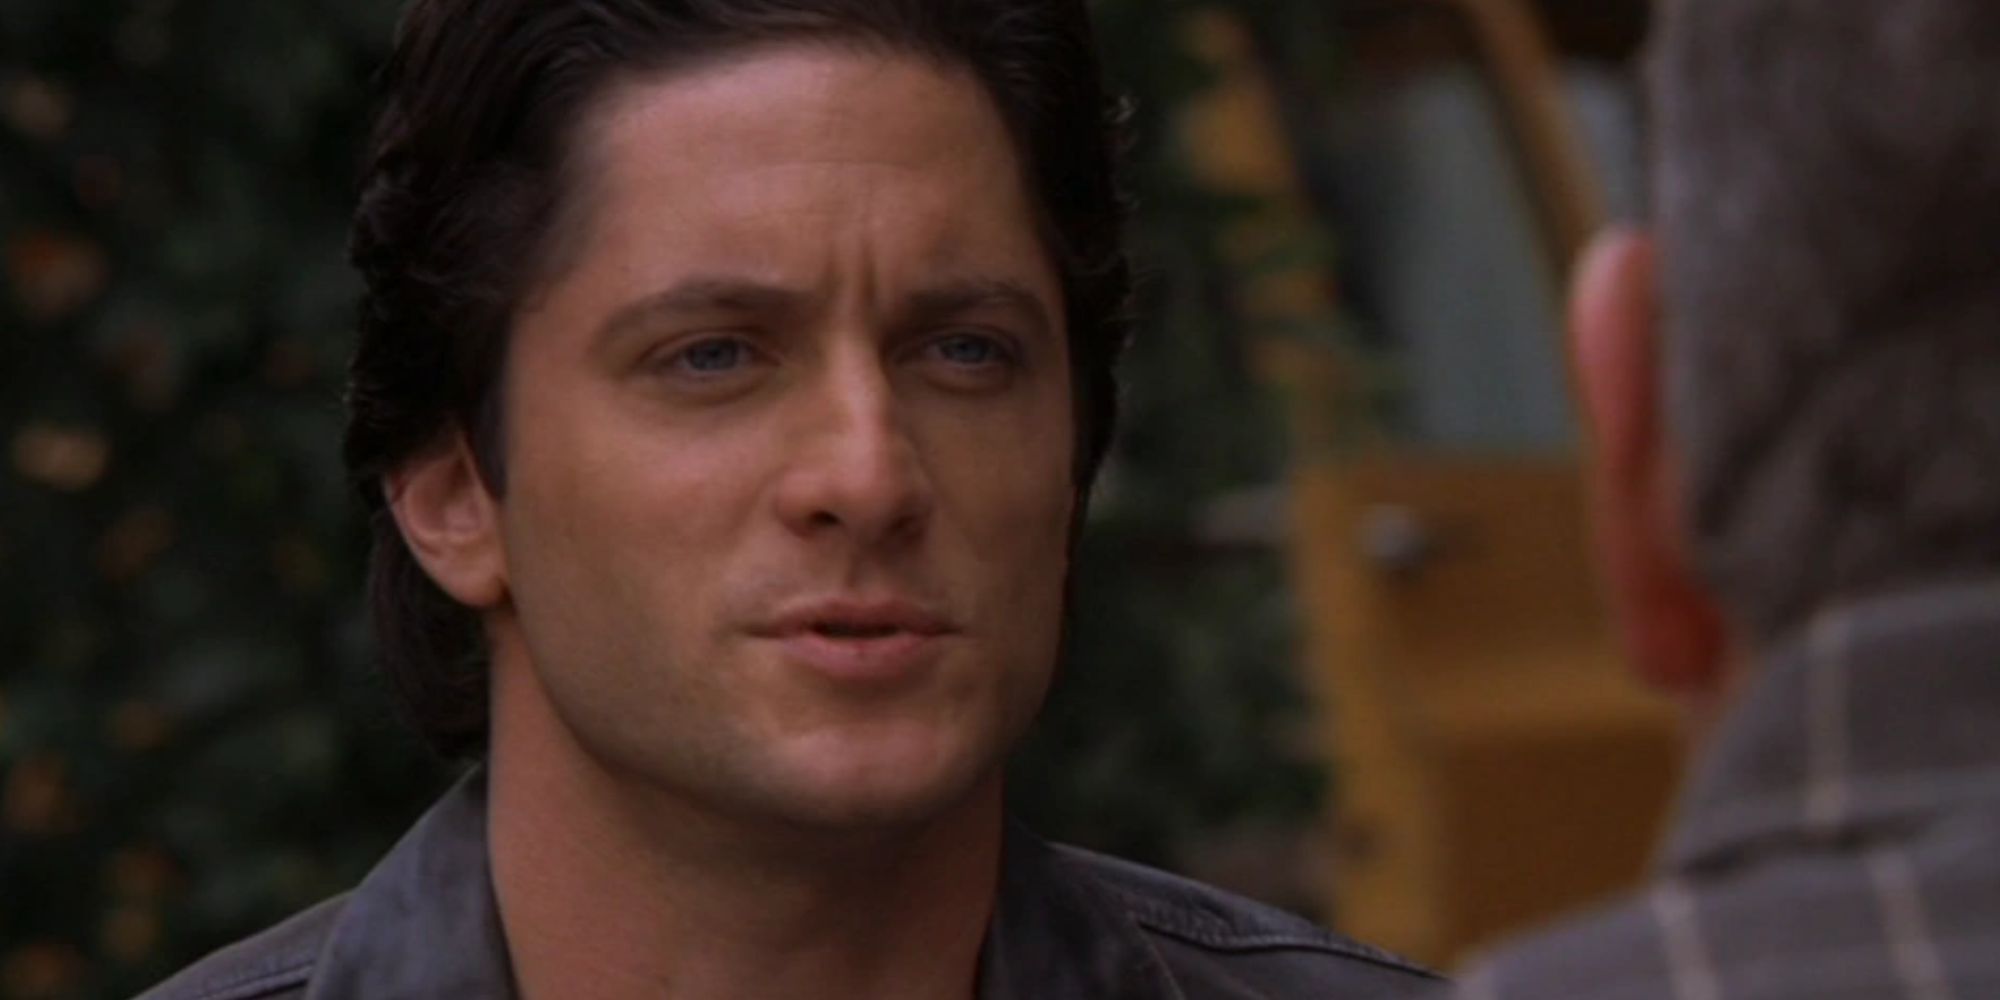 David Conran as Jim Clancy in mid-conversation in Ghost Whisperer